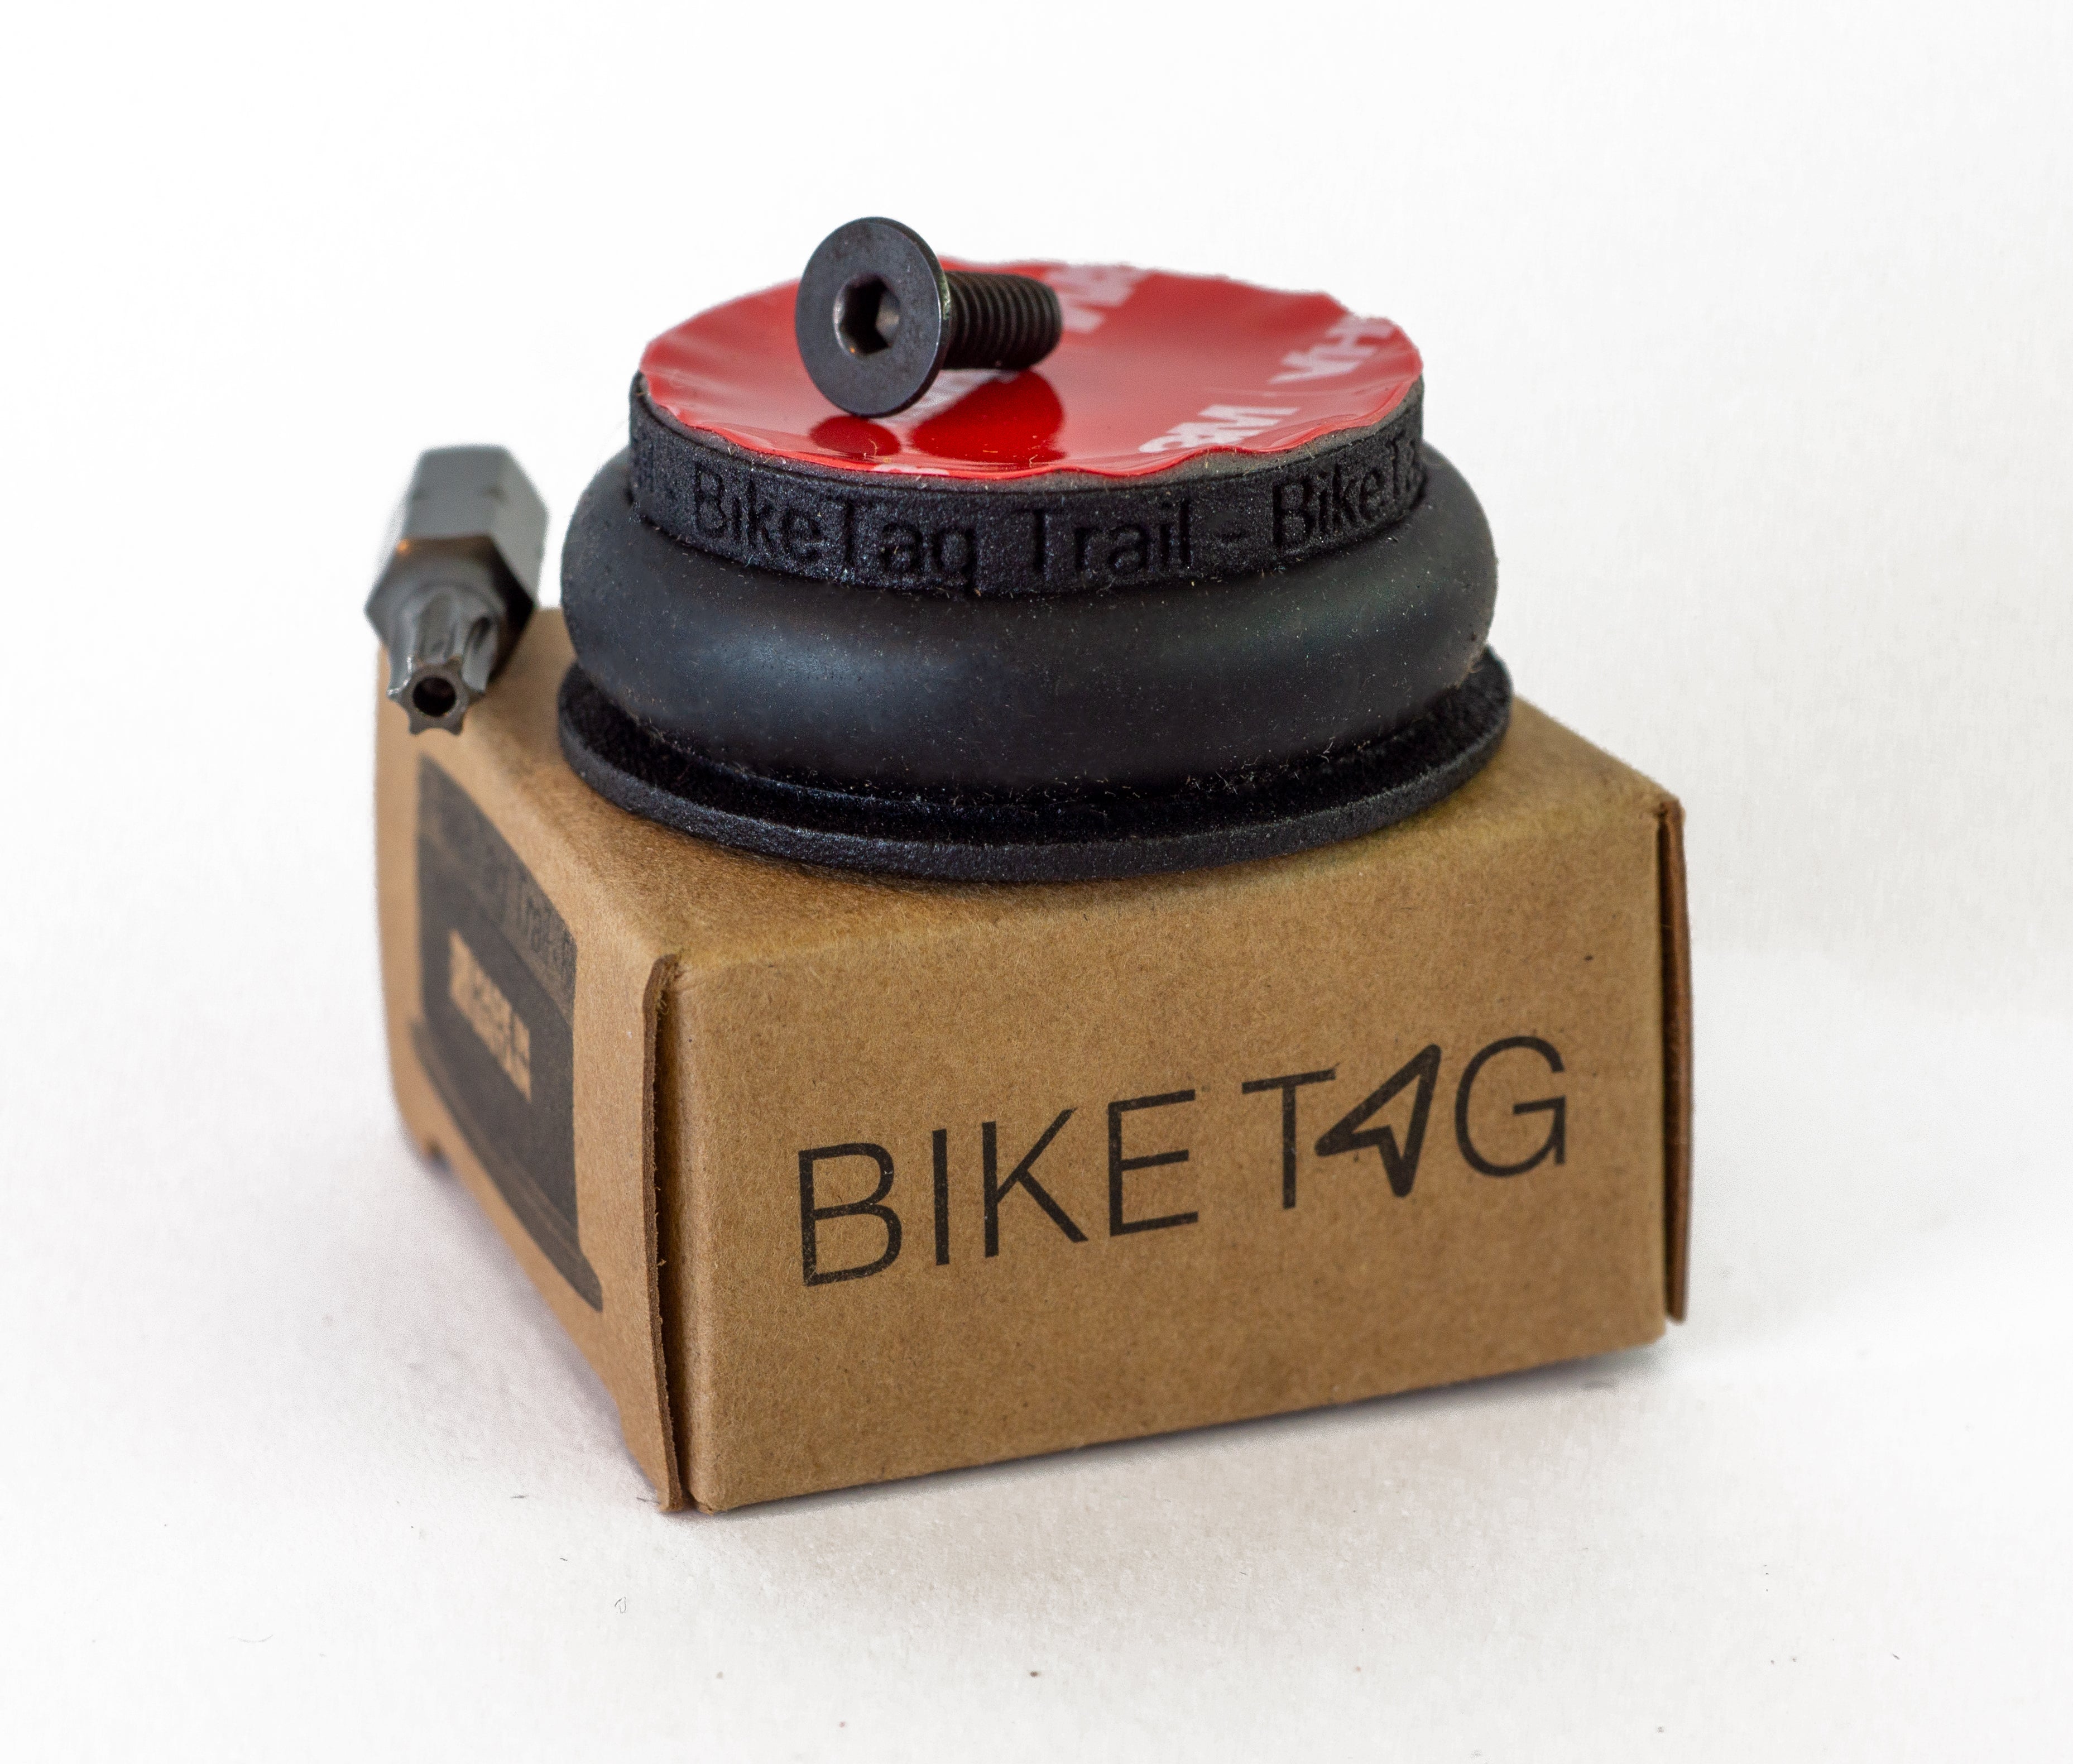 BikeTag Trail bike tracker with a security torx bit and screw resting on top of a BikeTag branded box on white background.